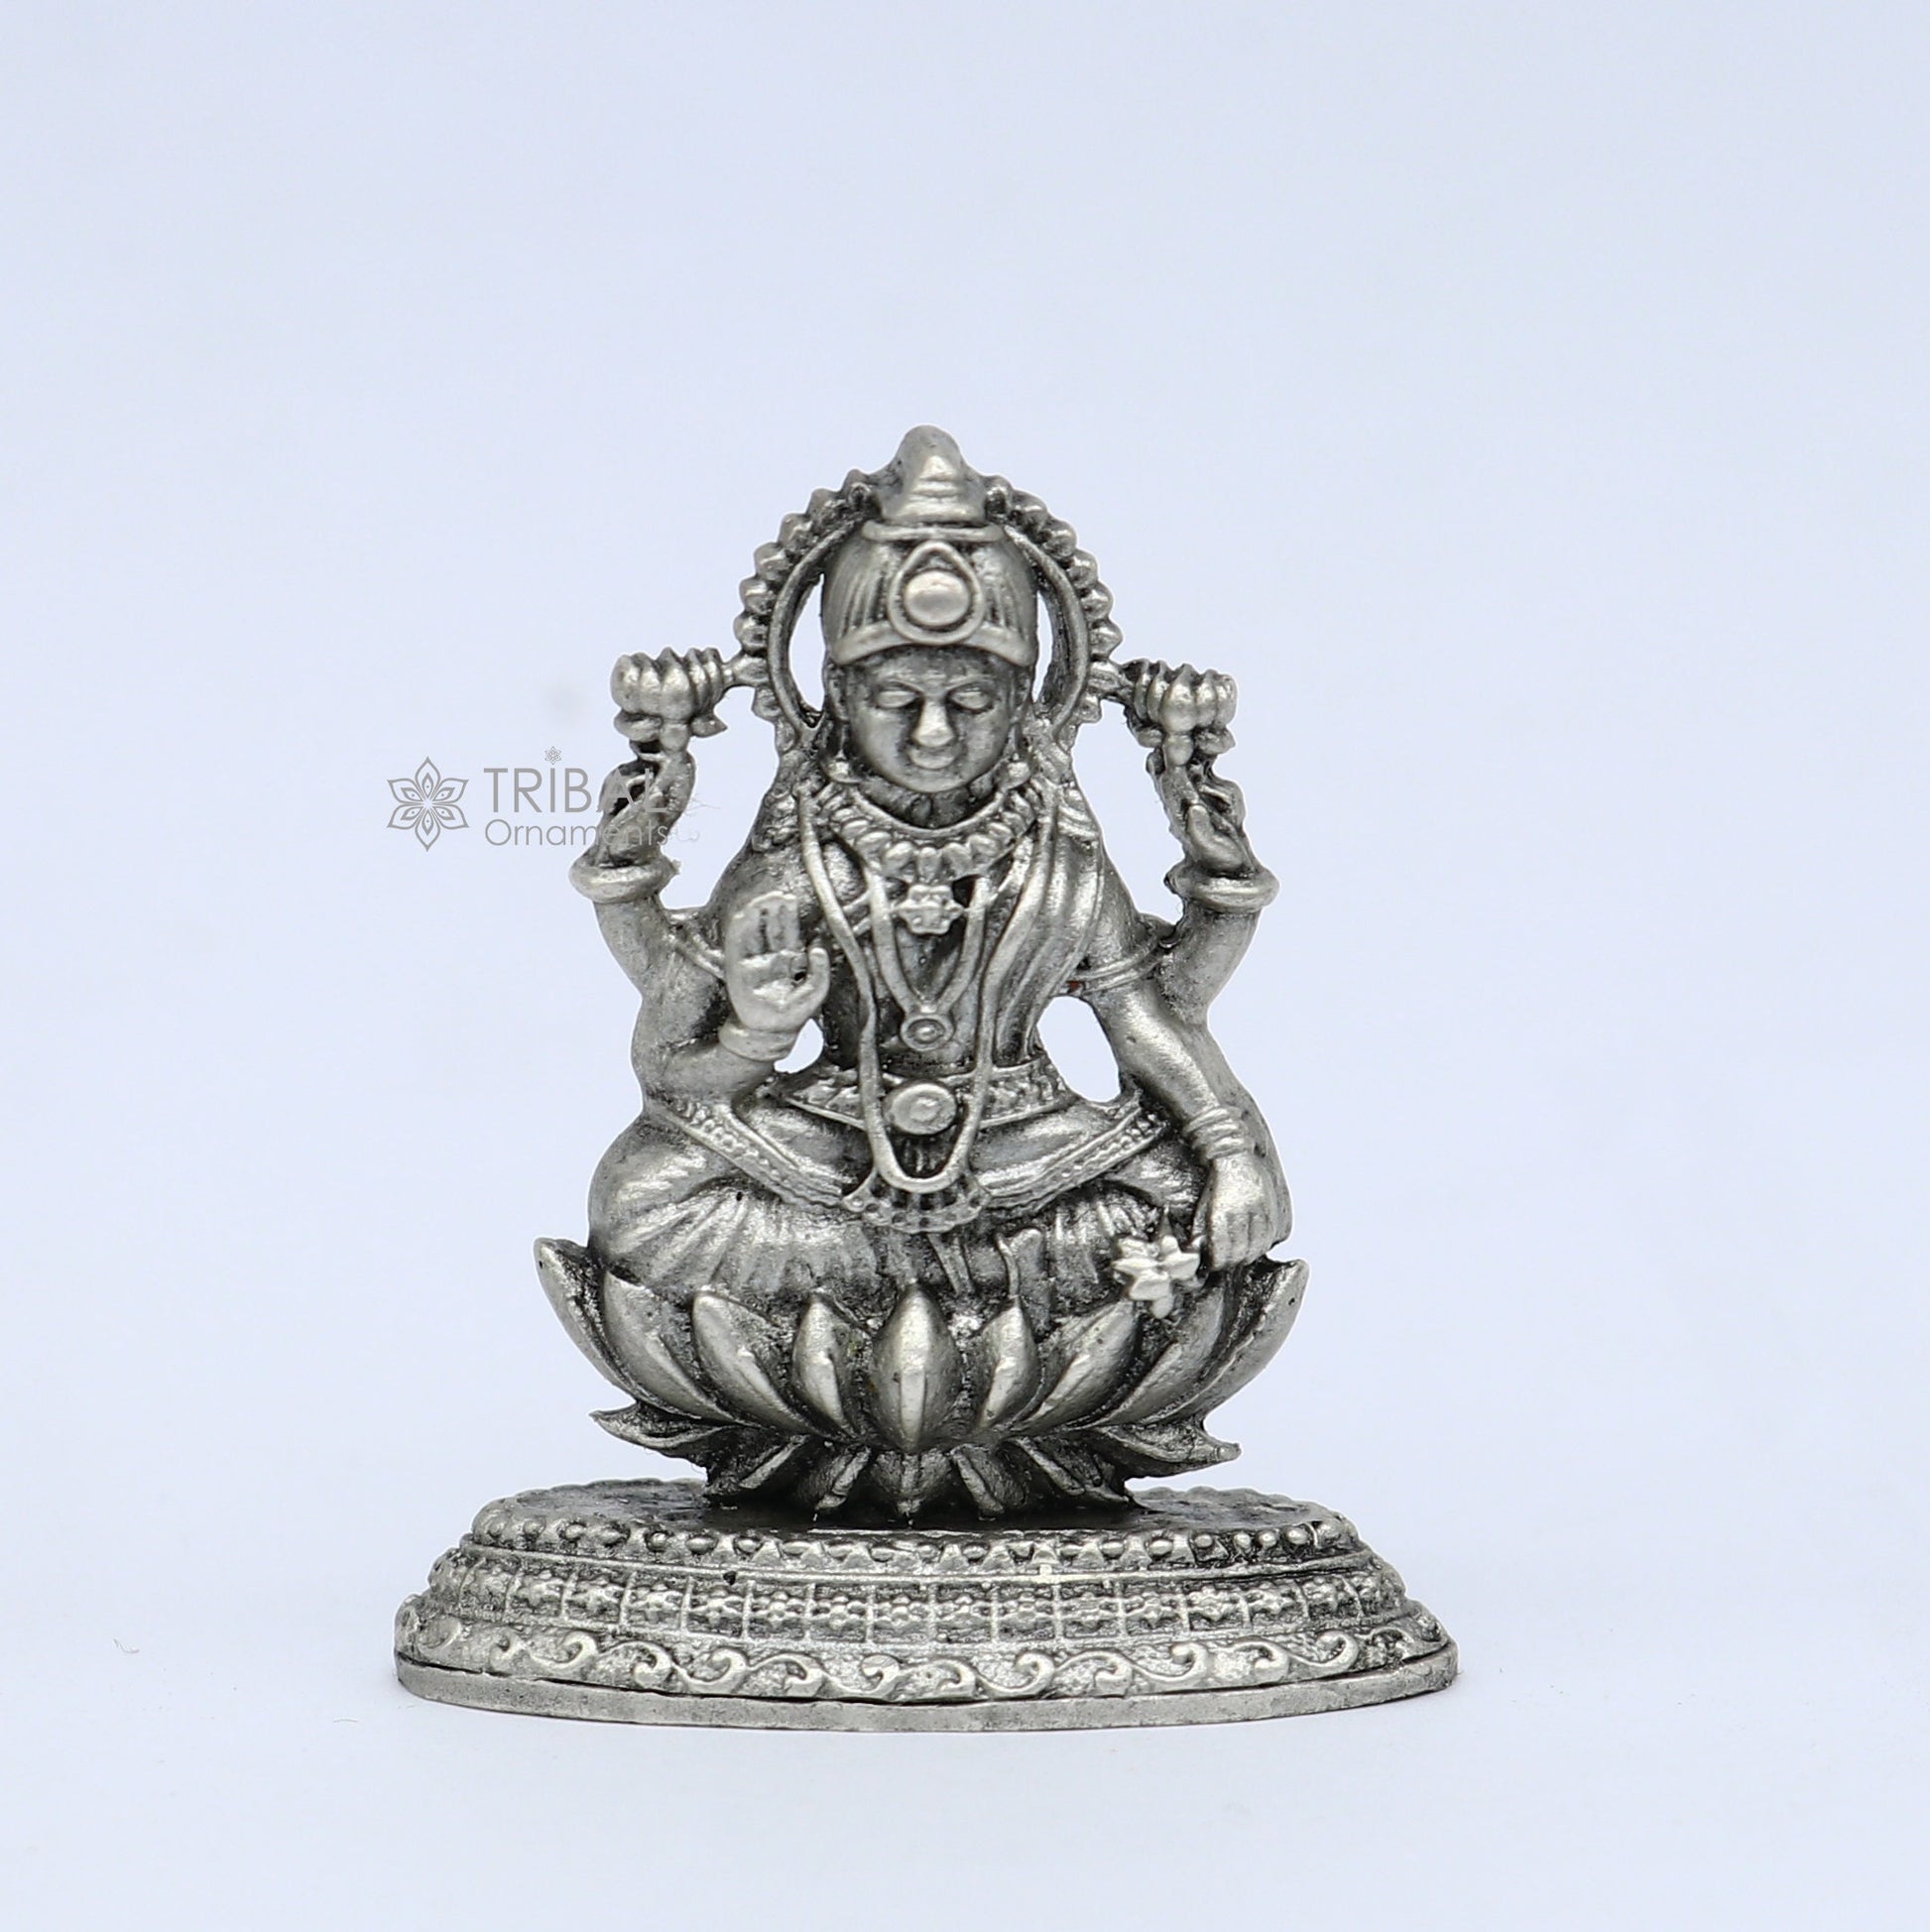 Kamlasan Goddess Lakshmi Divine statue figurine for puja,best way for Diwali festival puja or worshipping for wealth and prosperity art740 - TRIBAL ORNAMENTS